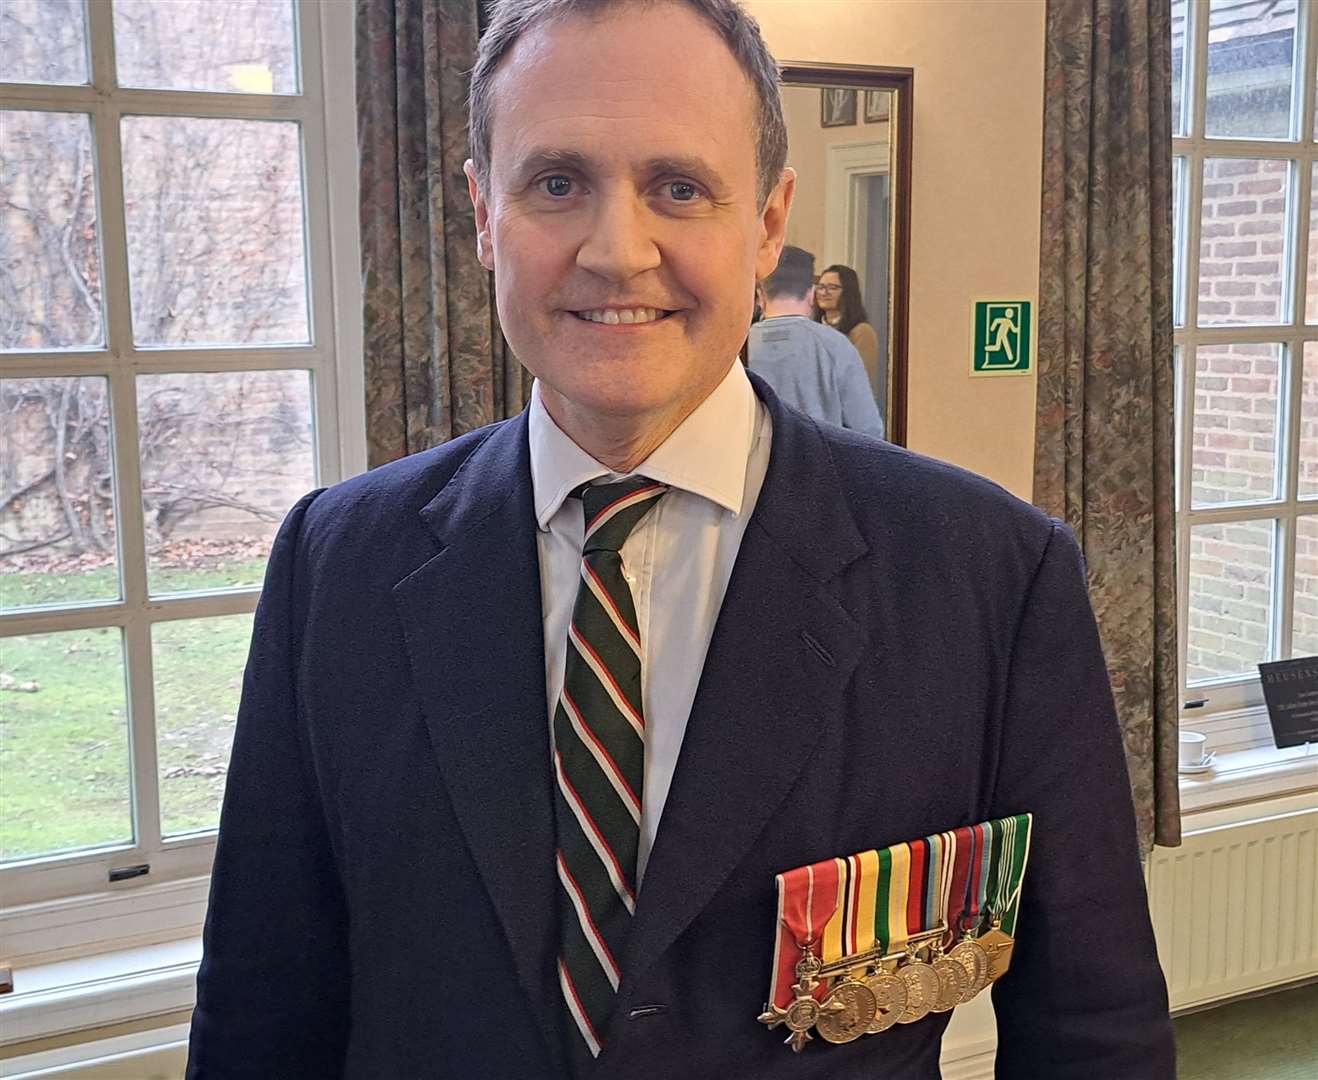 MP Tom Tugendhat said: "They ensured our safety today."